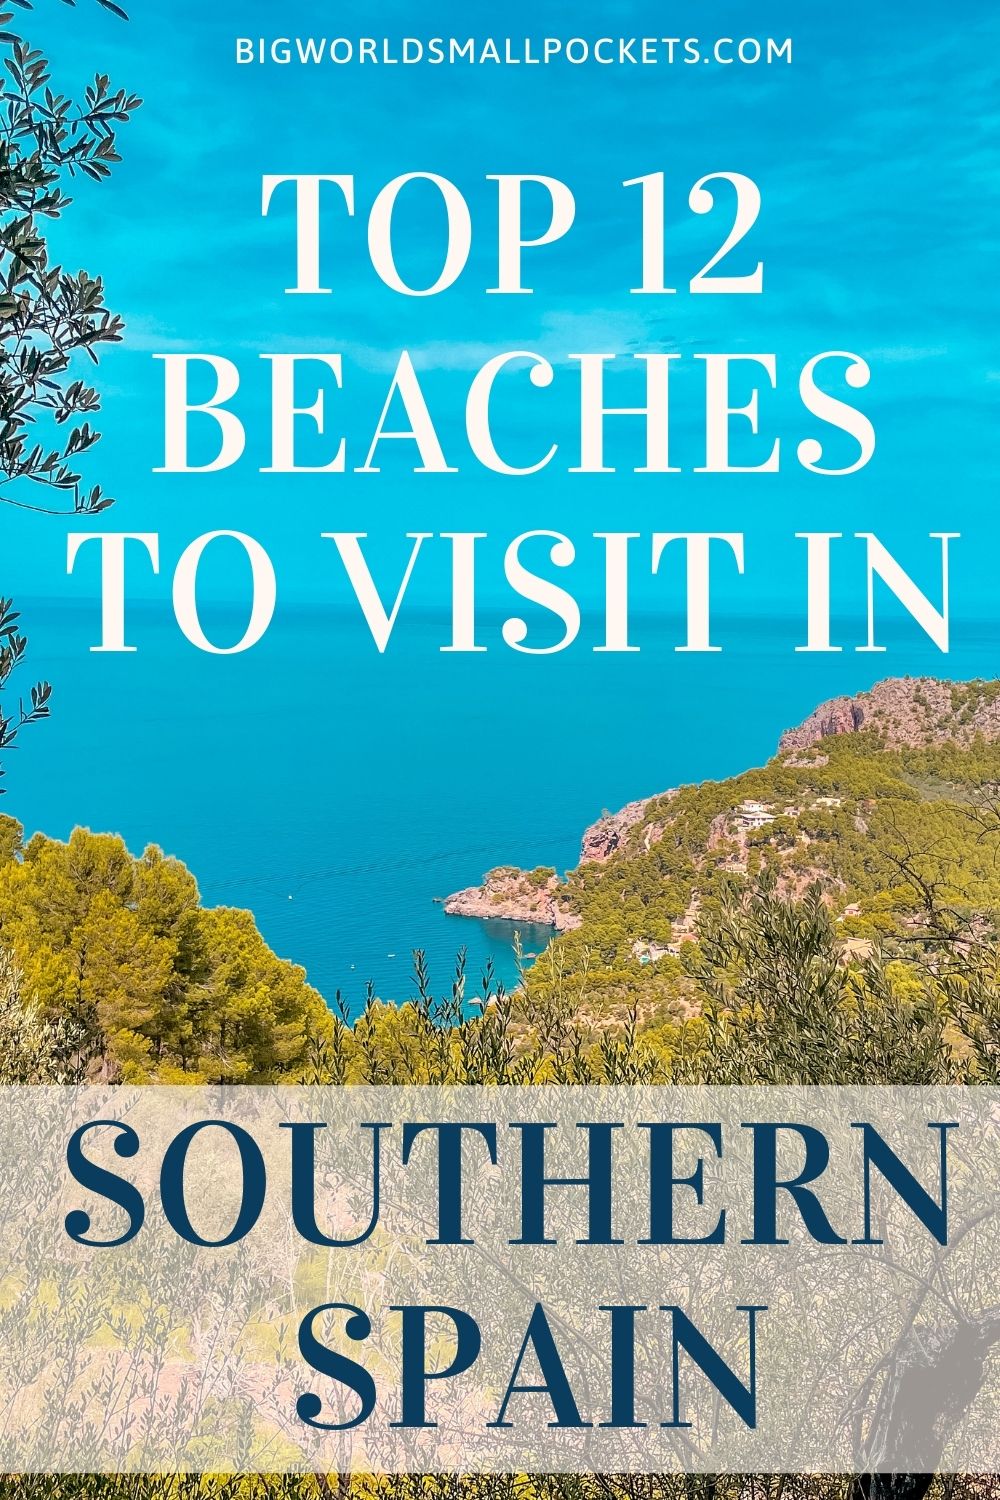 Top 12 Beaches in Southern Spain